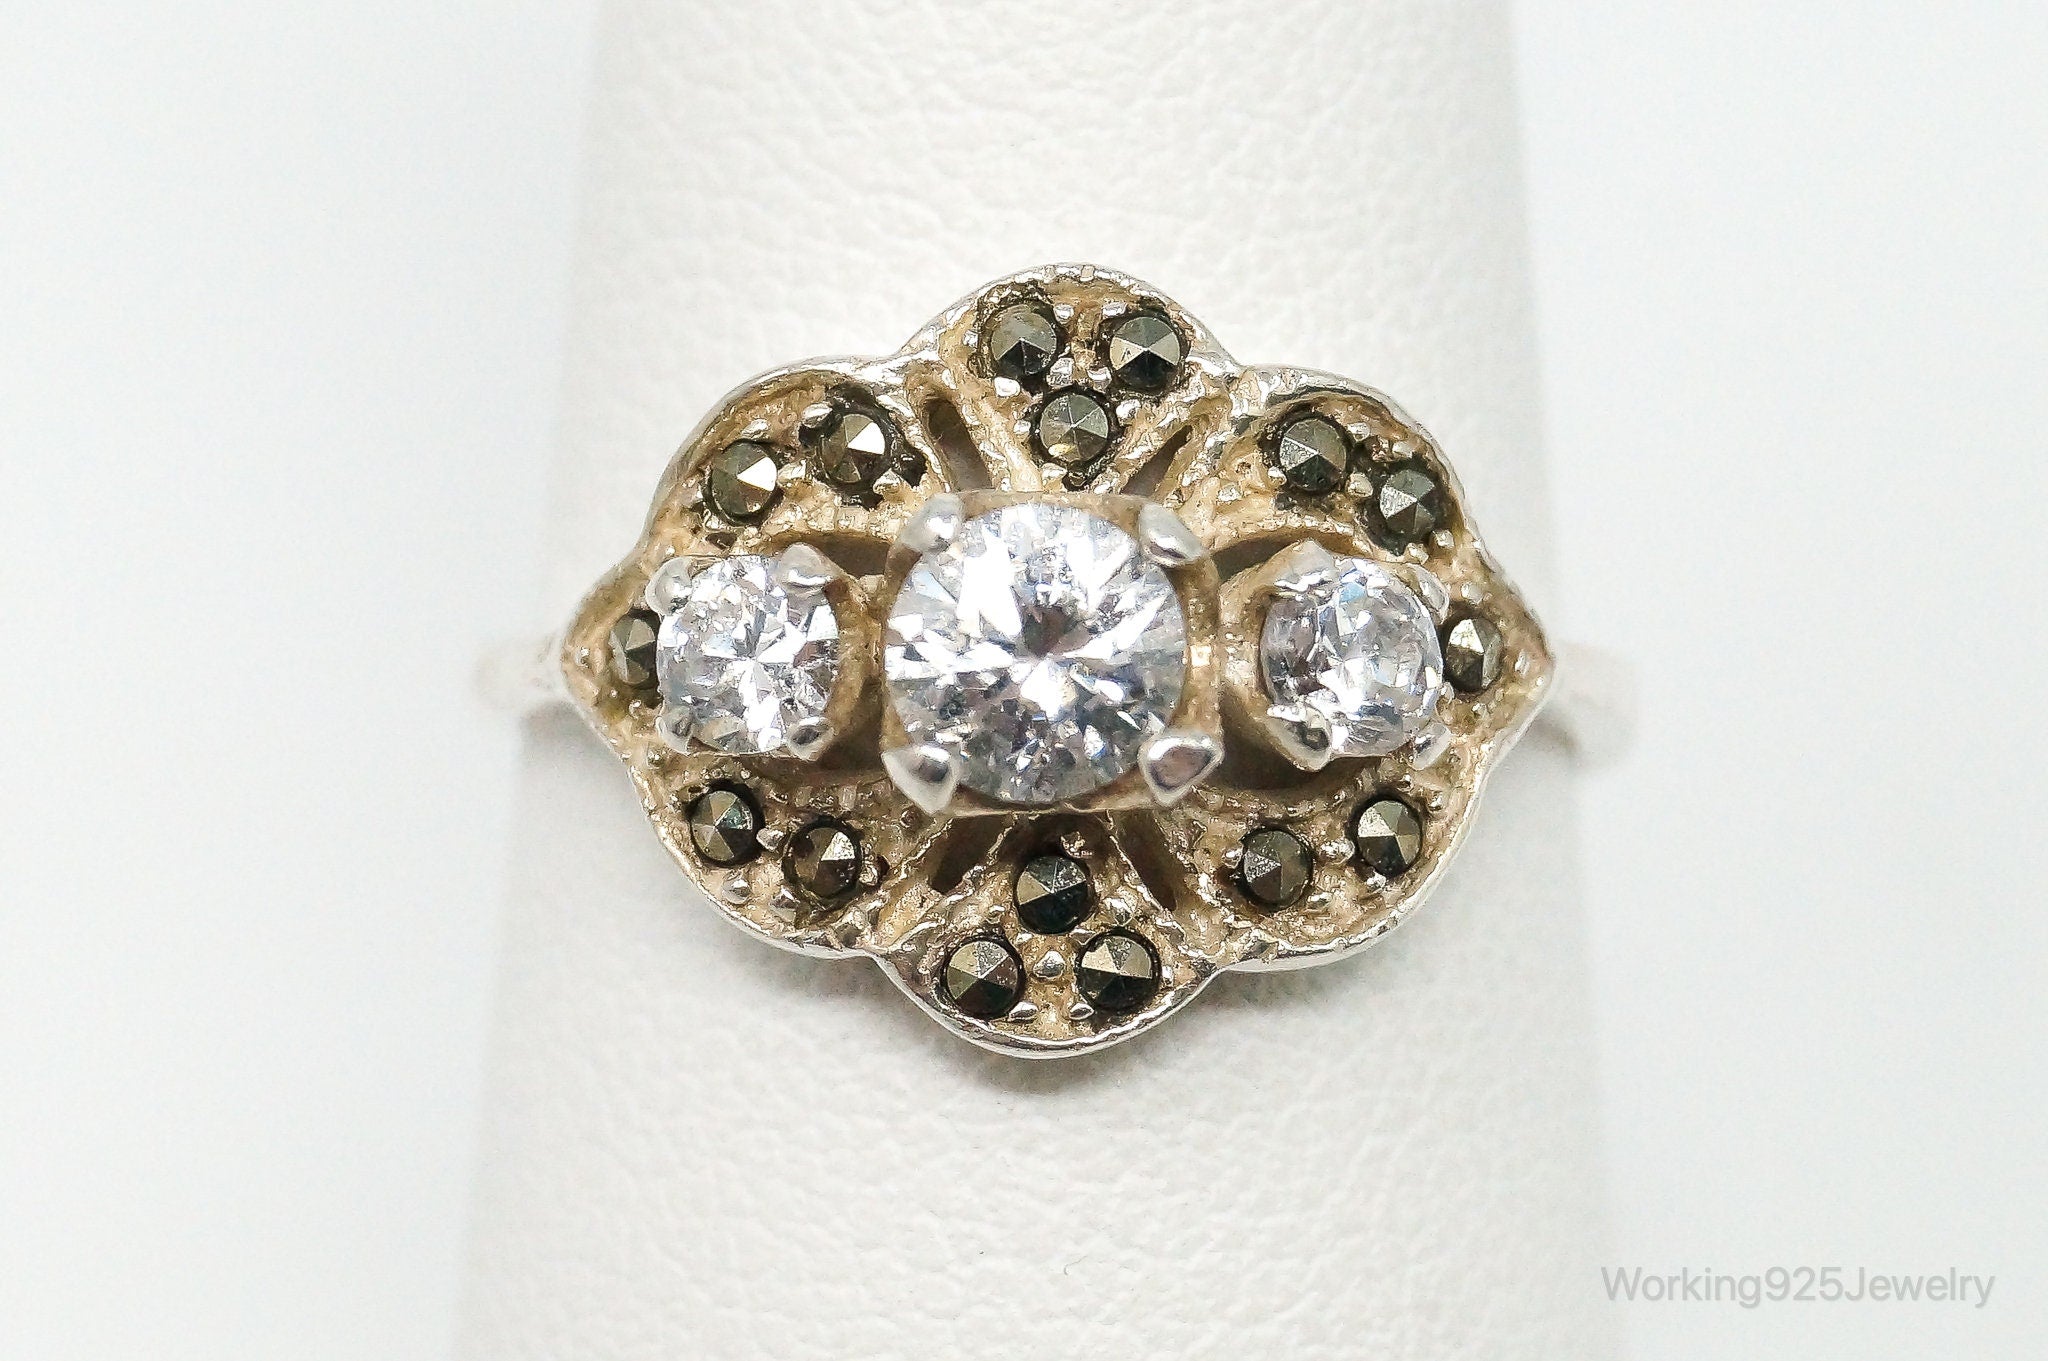 Vintage Cubic Zirconia Marcasite Sterling Silver Ring - Size 7